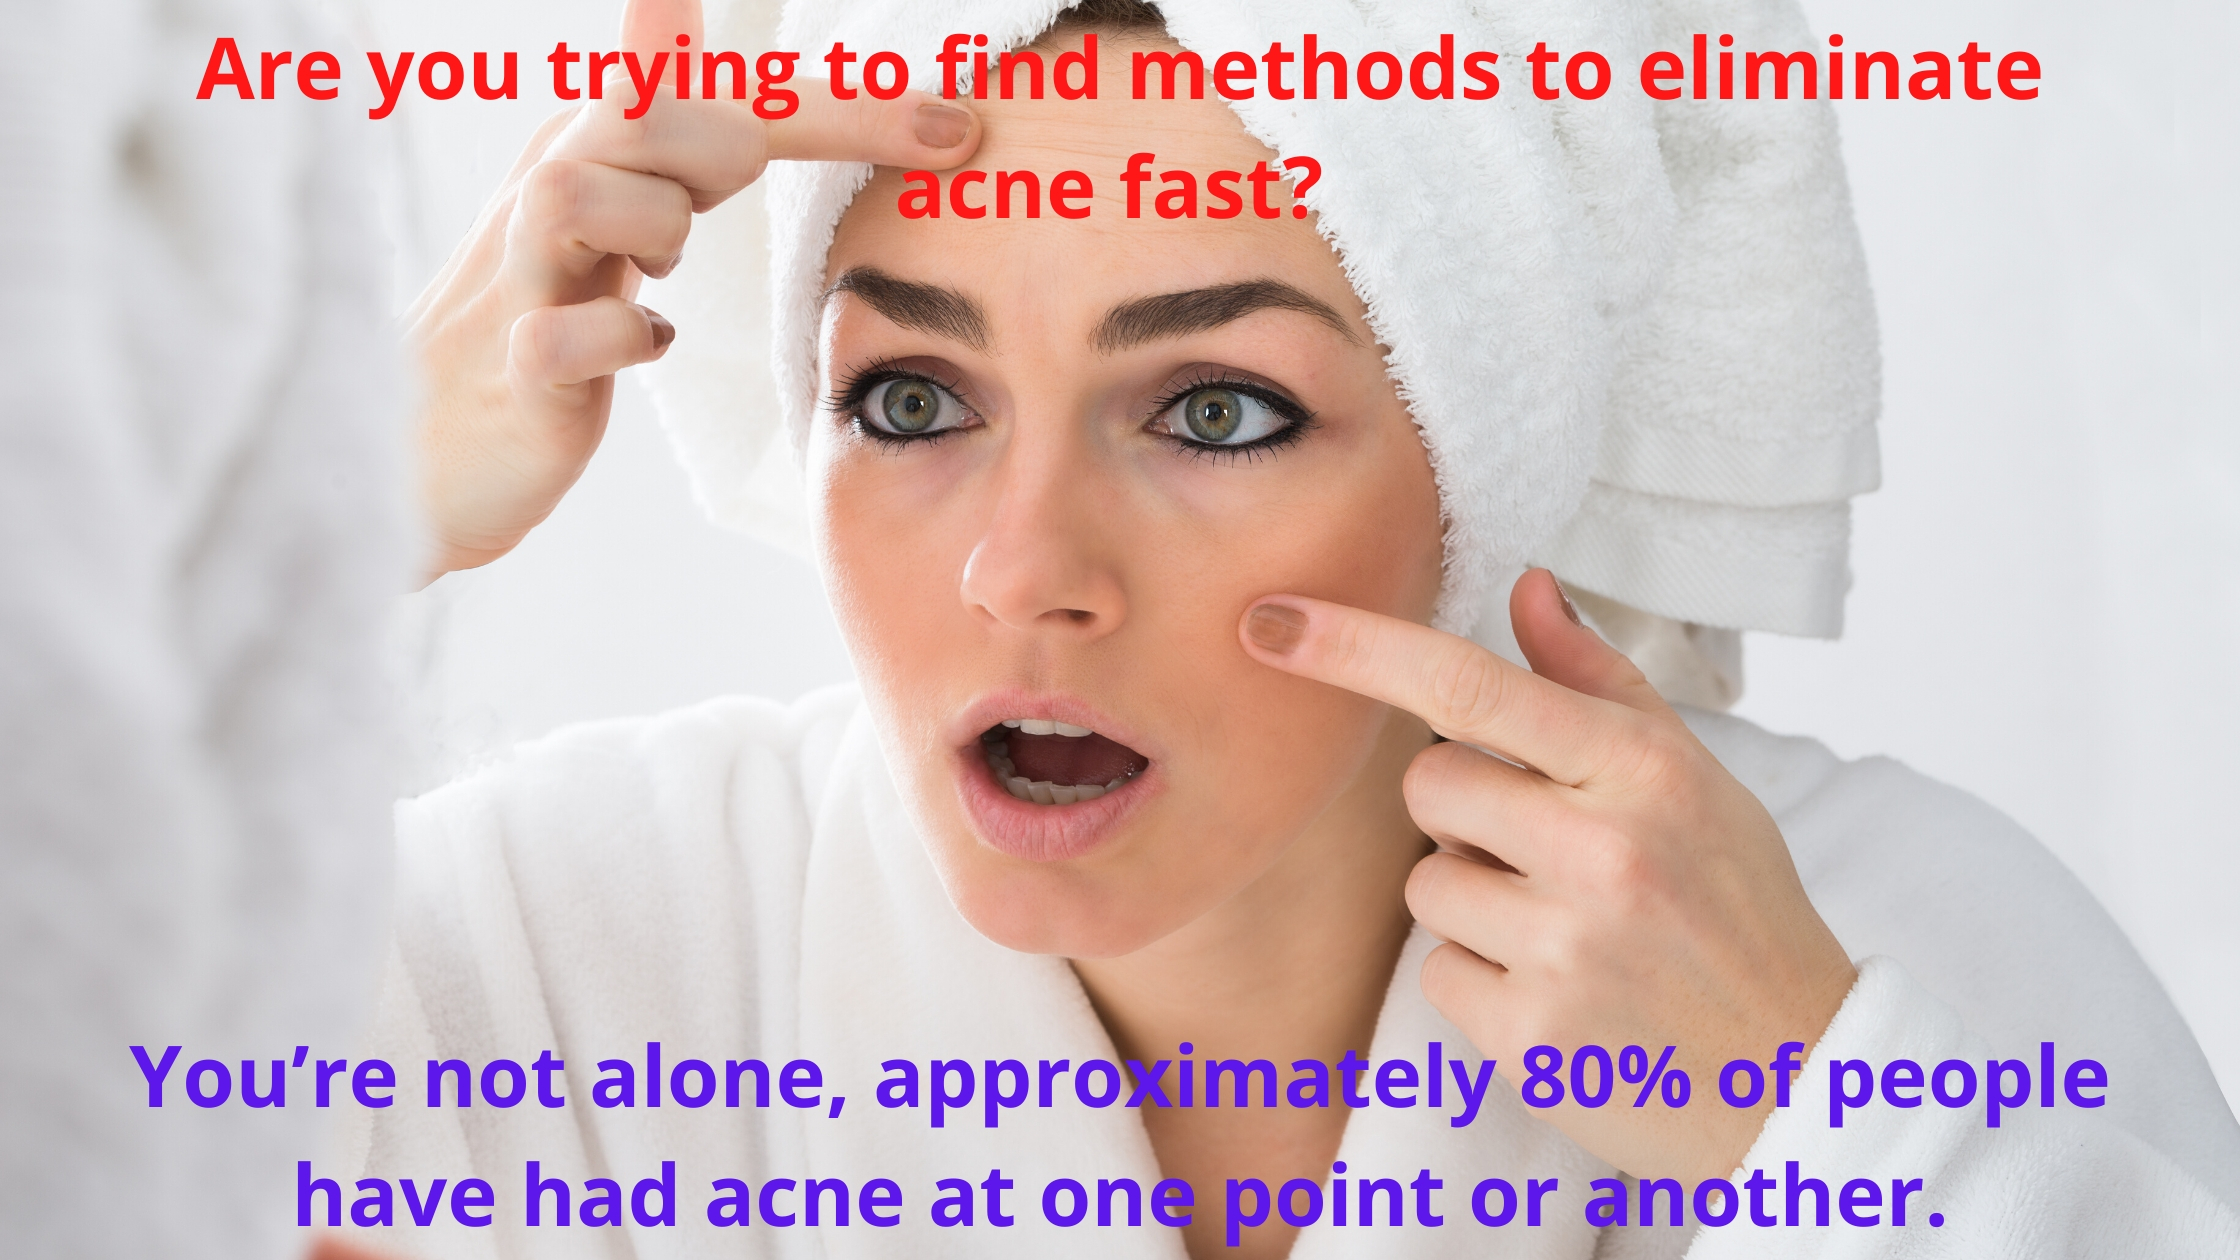 How To Remove Acne Fast – Use The Best Treatment Alternatives?